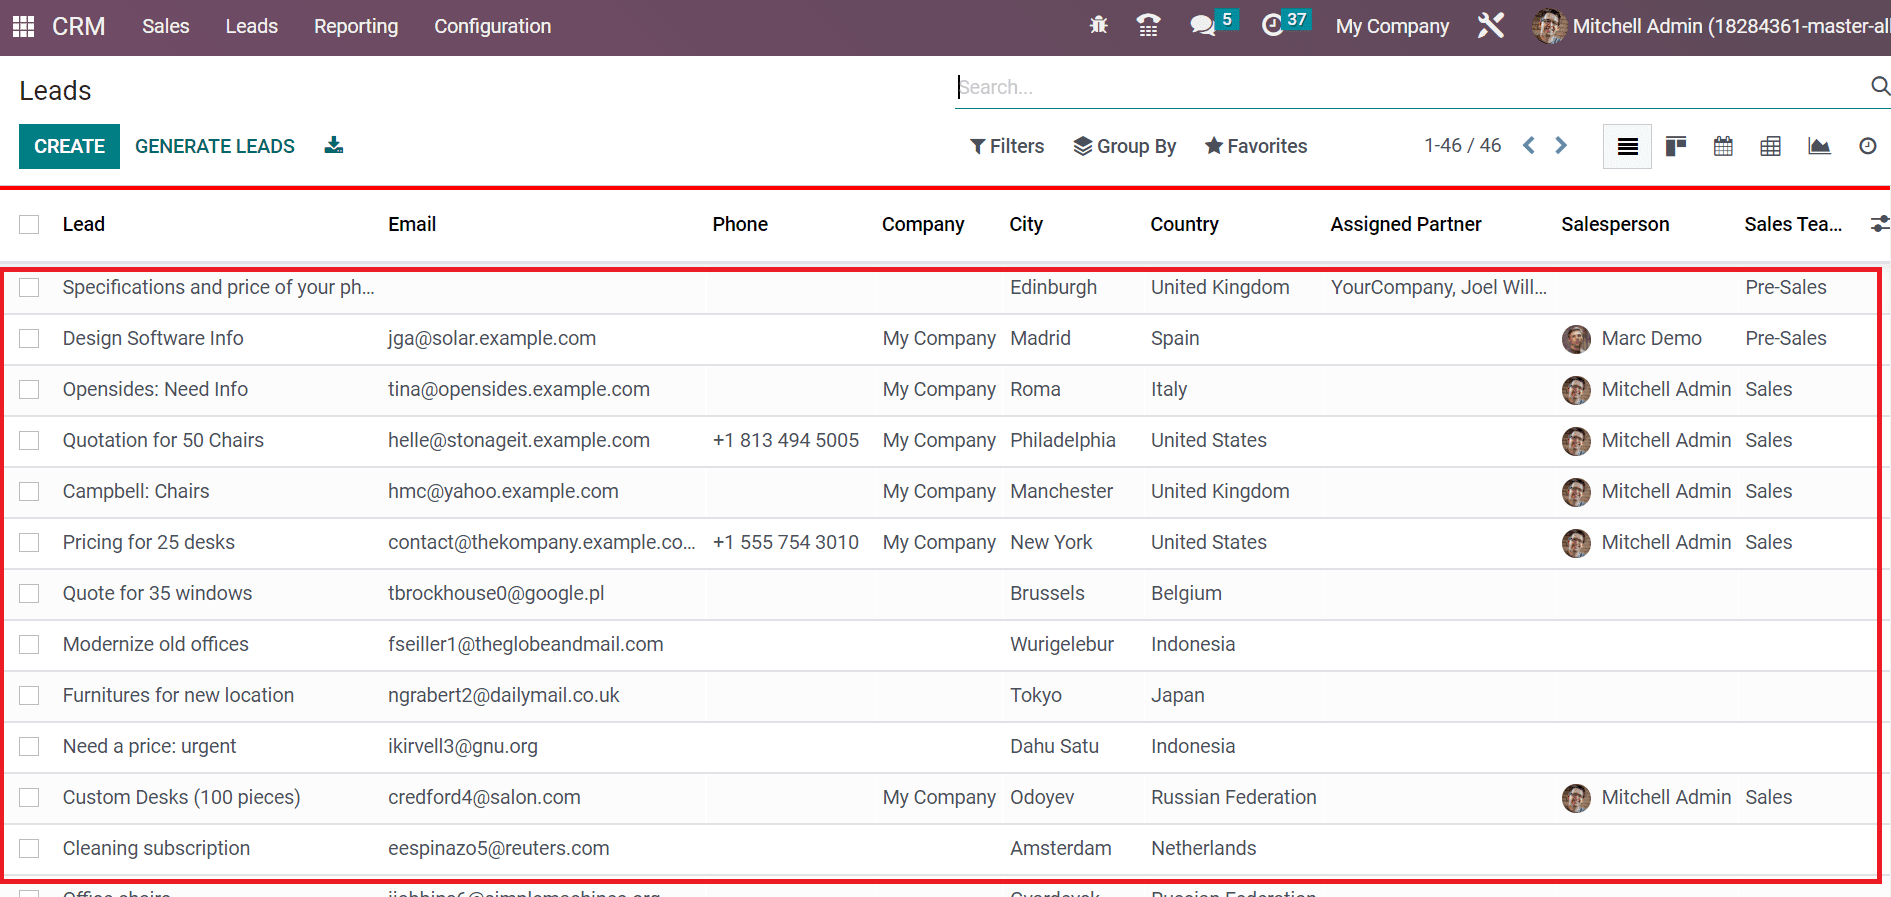 how-to-import-leads-with-the-help-of-odoo-16-crm-13